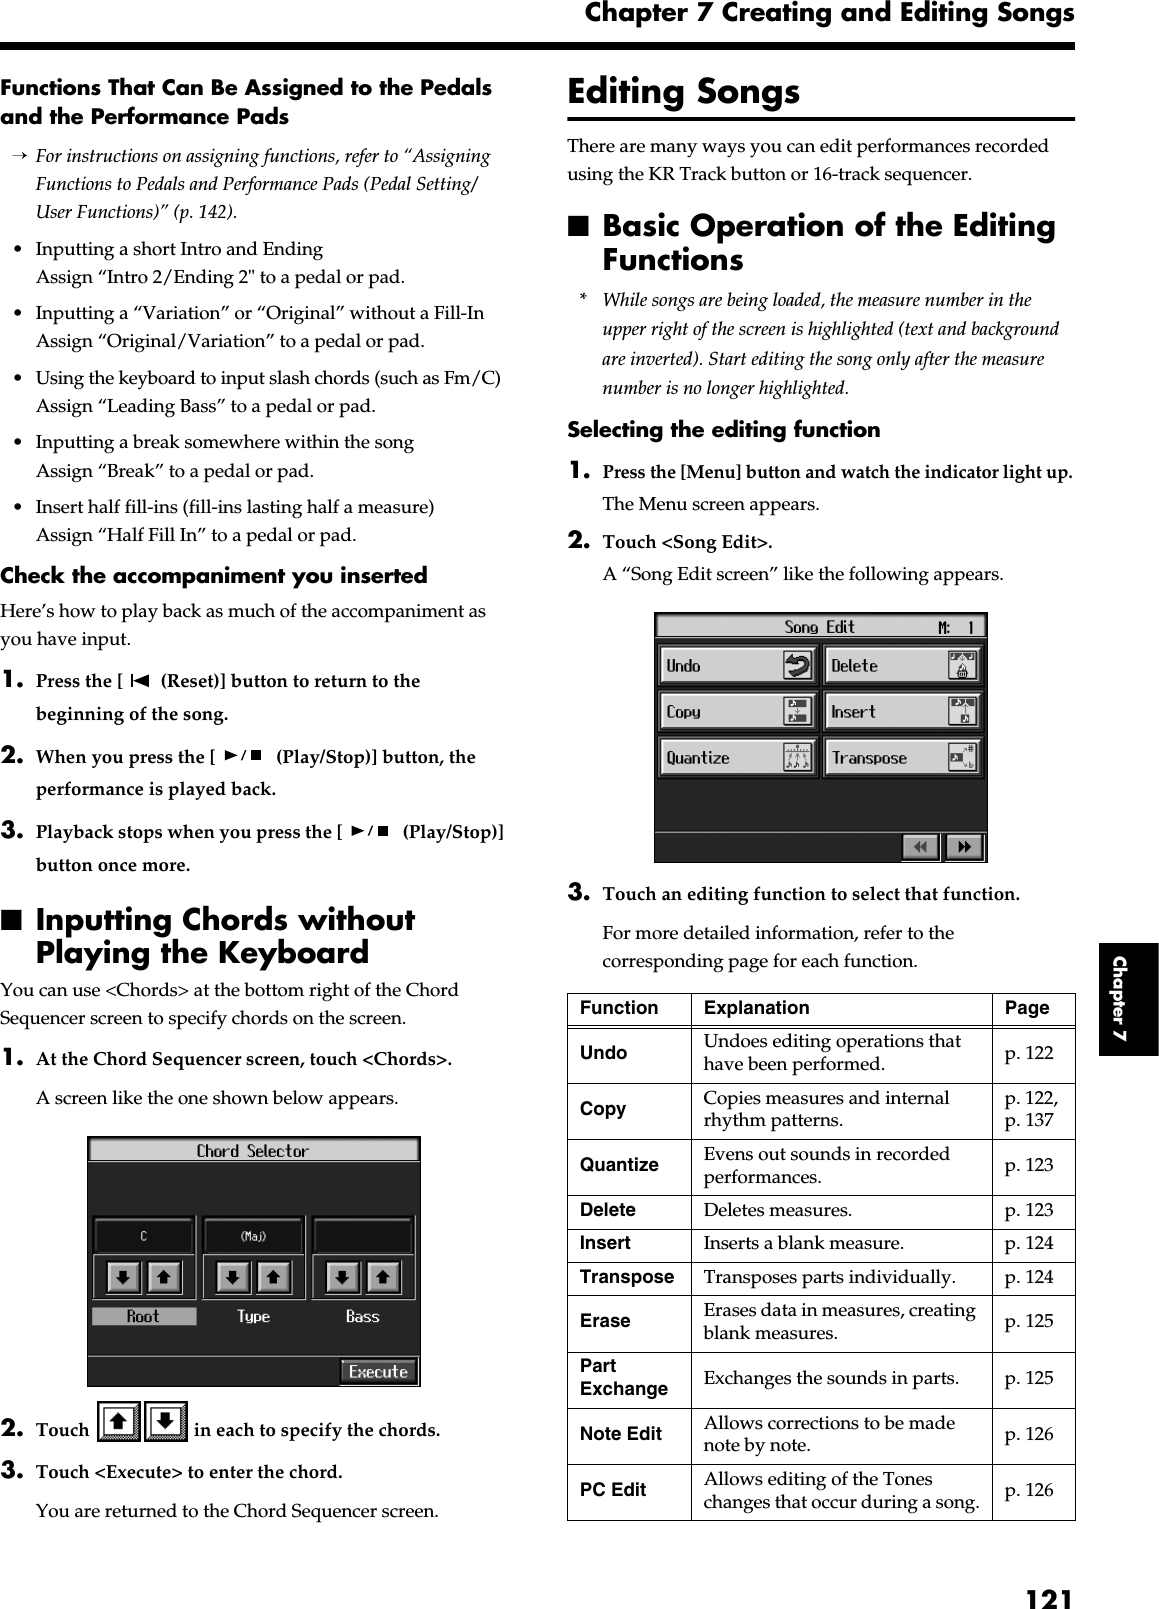 121Chapter 7 Creating and Editing SongsChapter 7Functions That Can Be Assigned to the Pedals and the Performance Pads→For instructions on assigning functions, refer to “Assigning Functions to Pedals and Performance Pads (Pedal Setting/User Functions)” (p. 142).• Inputting a short Intro and EndingAssign “Intro 2/Ending 2&quot; to a pedal or pad.• Inputting a “Variation” or “Original” without a Fill-InAssign “Original/Variation” to a pedal or pad.• Using the keyboard to input slash chords (such as Fm/C)Assign “Leading Bass” to a pedal or pad.• Inputting a break somewhere within the songAssign “Break” to a pedal or pad.• Insert half fill-ins (fill-ins lasting half a measure)Assign “Half Fill In” to a pedal or pad.Check the accompaniment you insertedHere’s how to play back as much of the accompaniment as you have input.1. Press the [  (Reset)] button to return to the beginning of the song.2. When you press the [  (Play/Stop)] button, the performance is played back.3. Playback stops when you press the [  (Play/Stop)] button once more.■Inputting Chords without Playing the Keyboard You can use &lt;Chords&gt; at the bottom right of the Chord Sequencer screen to specify chords on the screen. 1. At the Chord Sequencer screen, touch &lt;Chords&gt;. A screen like the one shown below appears. fig.d-chordinput.eps_502. Touch   in each to specify the chords. 3. Touch &lt;Execute&gt; to enter the chord. You are returned to the Chord Sequencer screen. Editing SongsThere are many ways you can edit performances recorded using the KR Track button or 16-track sequencer.■Basic Operation of the Editing Functions* While songs are being loaded, the measure number in the upper right of the screen is highlighted (text and background are inverted). Start editing the song only after the measure number is no longer highlighted.Selecting the editing function1.Press the [Menu] button and watch the indicator light up.The Menu screen appears.2. Touch &lt;Song Edit&gt;.A “Song Edit screen” like the following appears.fig.d-edit1.eps_503. Touch an editing function to select that function.For more detailed information, refer to the corresponding page for each function.Function Explanation PageUndo Undoes editing operations that have been performed. p. 122Copy Copies measures and internal rhythm patterns.p. 122, p. 137Quantize Evens out sounds in recorded performances. p. 123Delete Deletes measures. p. 123Insert Inserts a blank measure. p. 124Transpose Transposes parts individually. p. 124Erase Erases data in measures, creating blank measures. p. 125Part Exchange Exchanges the sounds in parts. p. 125Note Edit Allows corrections to be made note by note. p. 126PC Edit Allows editing of the Tones changes that occur during a song. p. 126